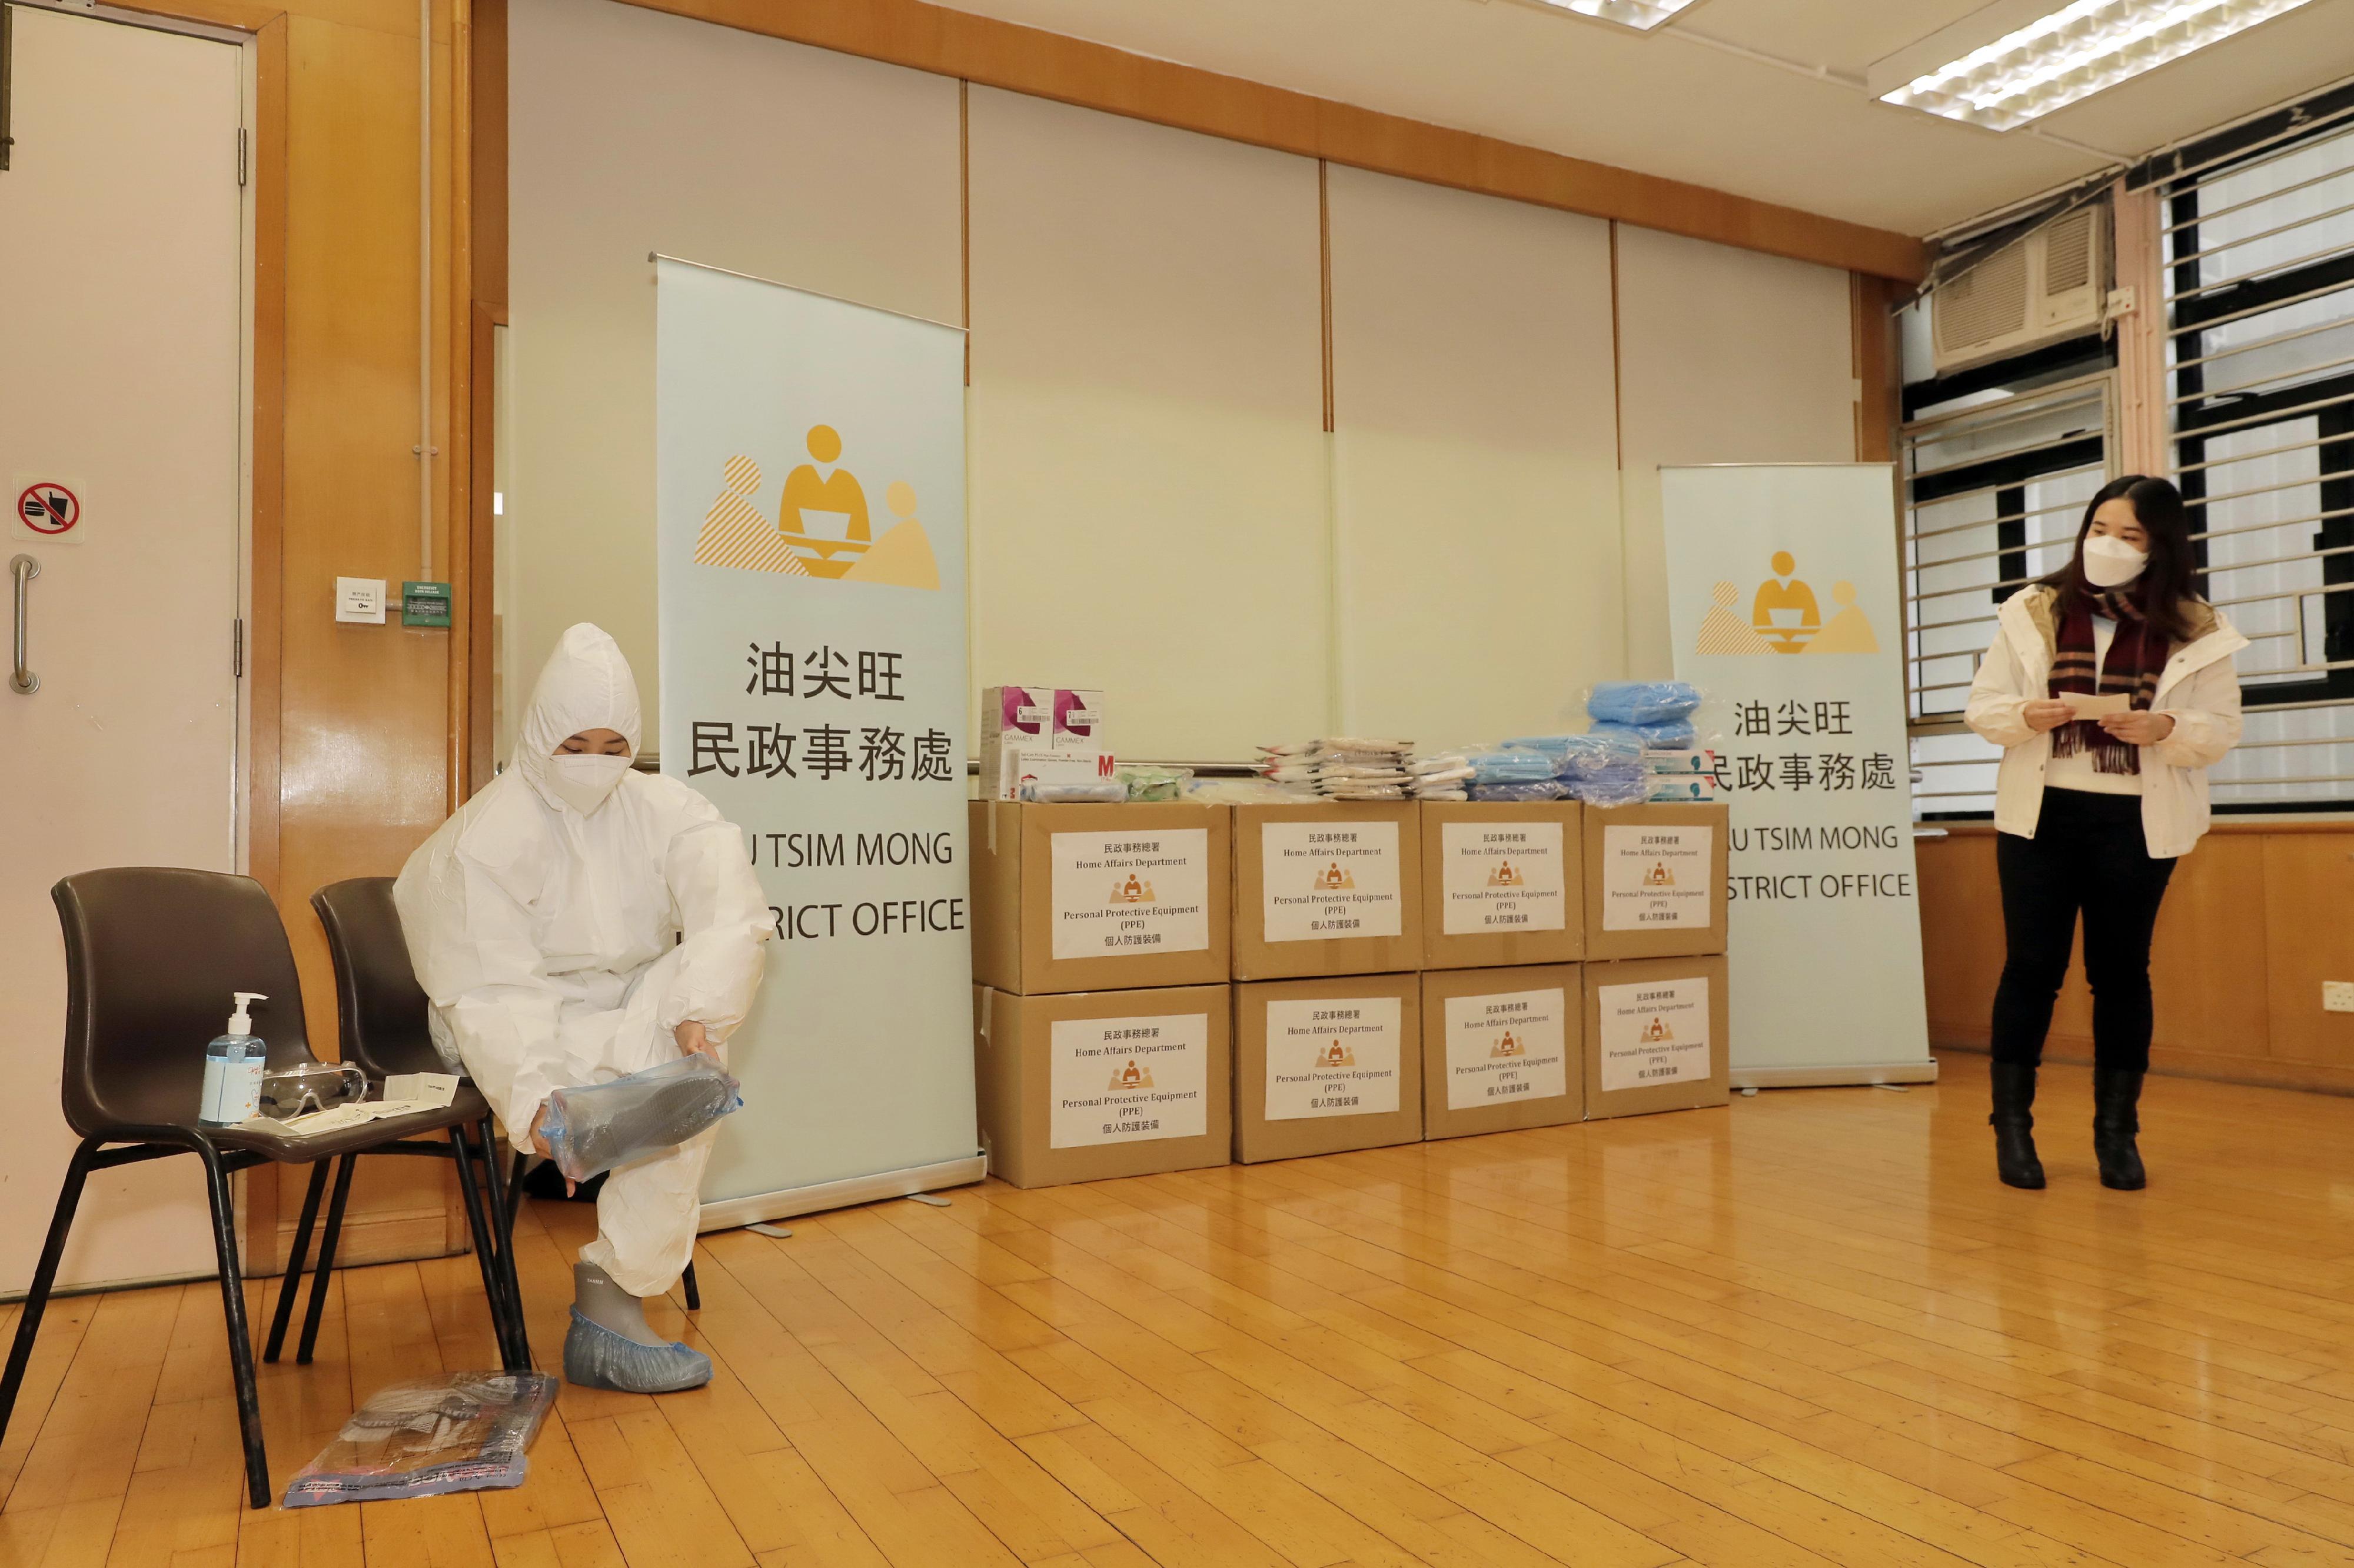 The Acting Secretary for Home Affairs, Mr Jack Chan, today (February 21) visited Henry G Leong Yaumatei Community Centre to present personal protective equipment to the Hong Kong Community Anti-Coronavirus Link. Photo shows the demonstration of the donning of personal protective equipment.